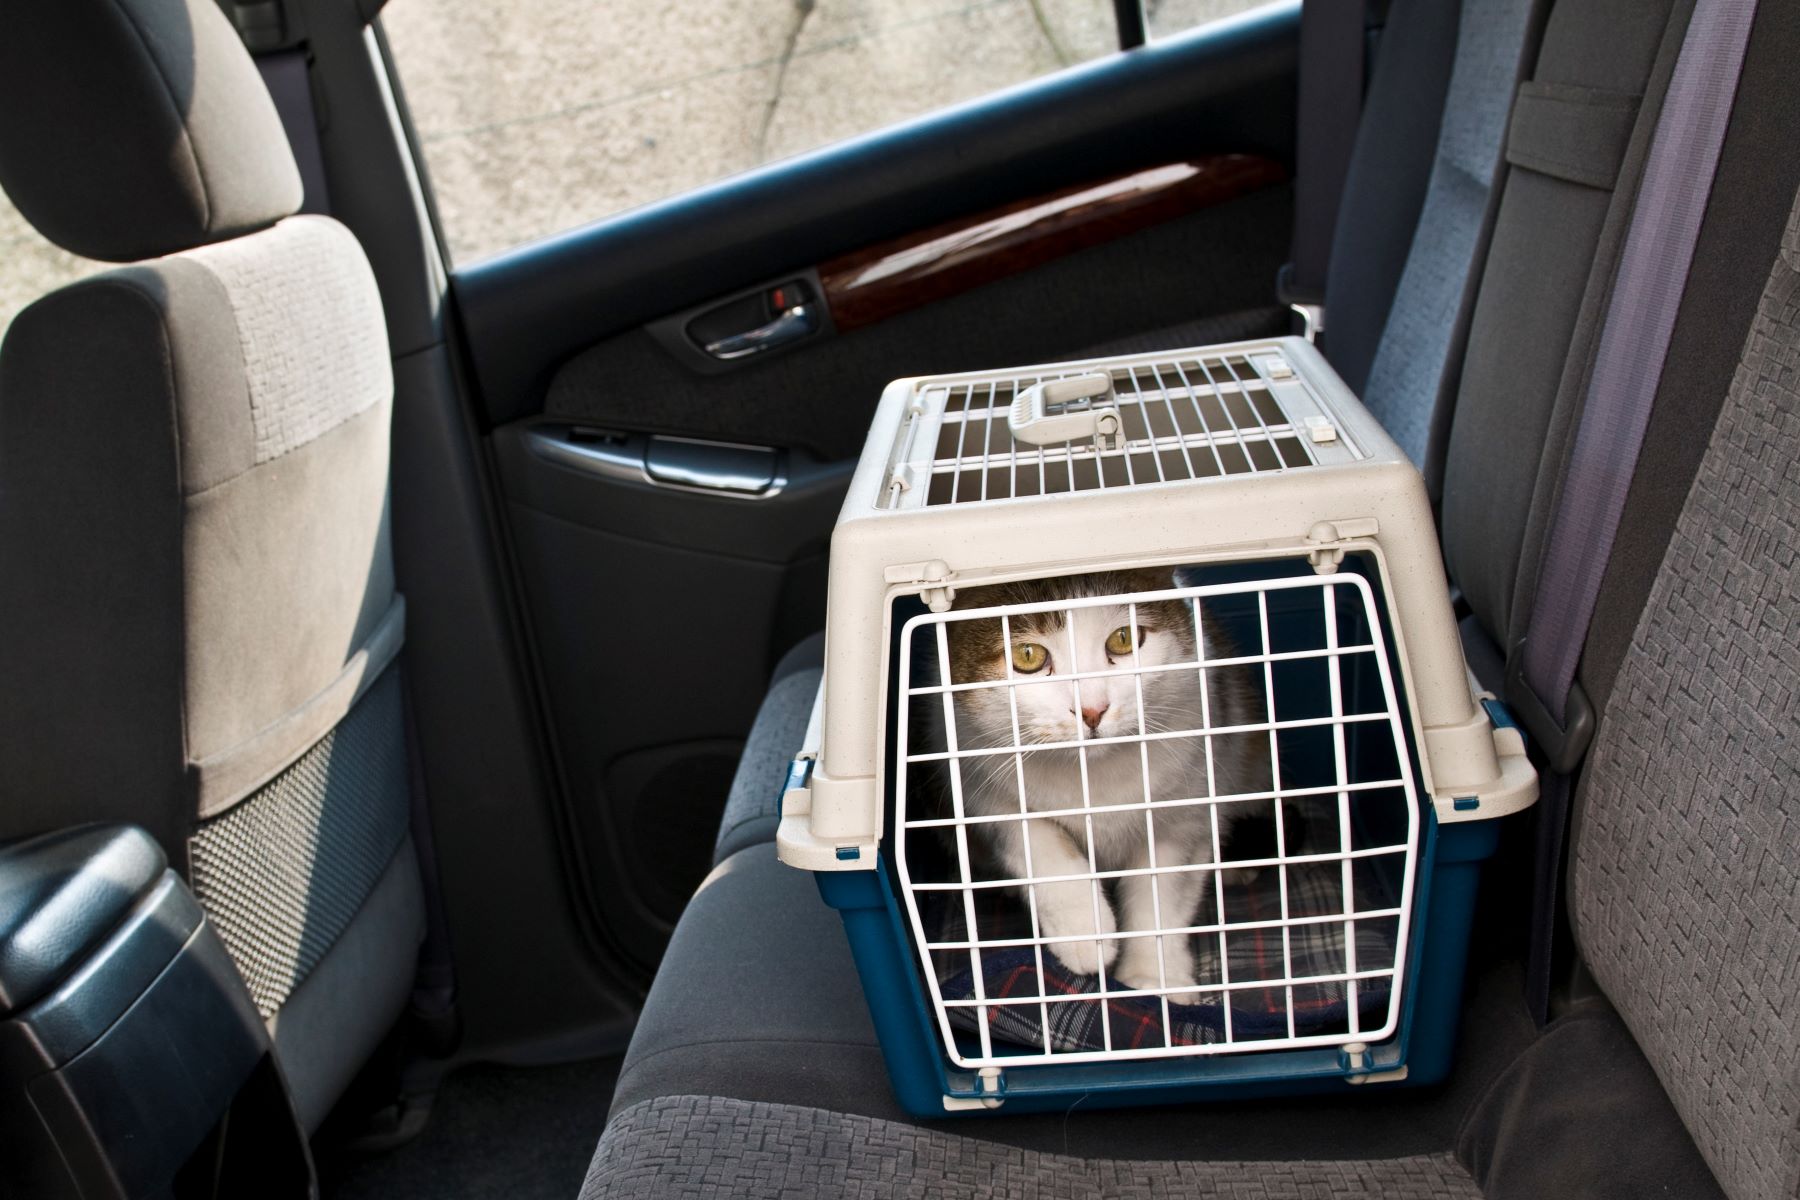 A cat in a vehicle pet carrier, a type of automotive pet product